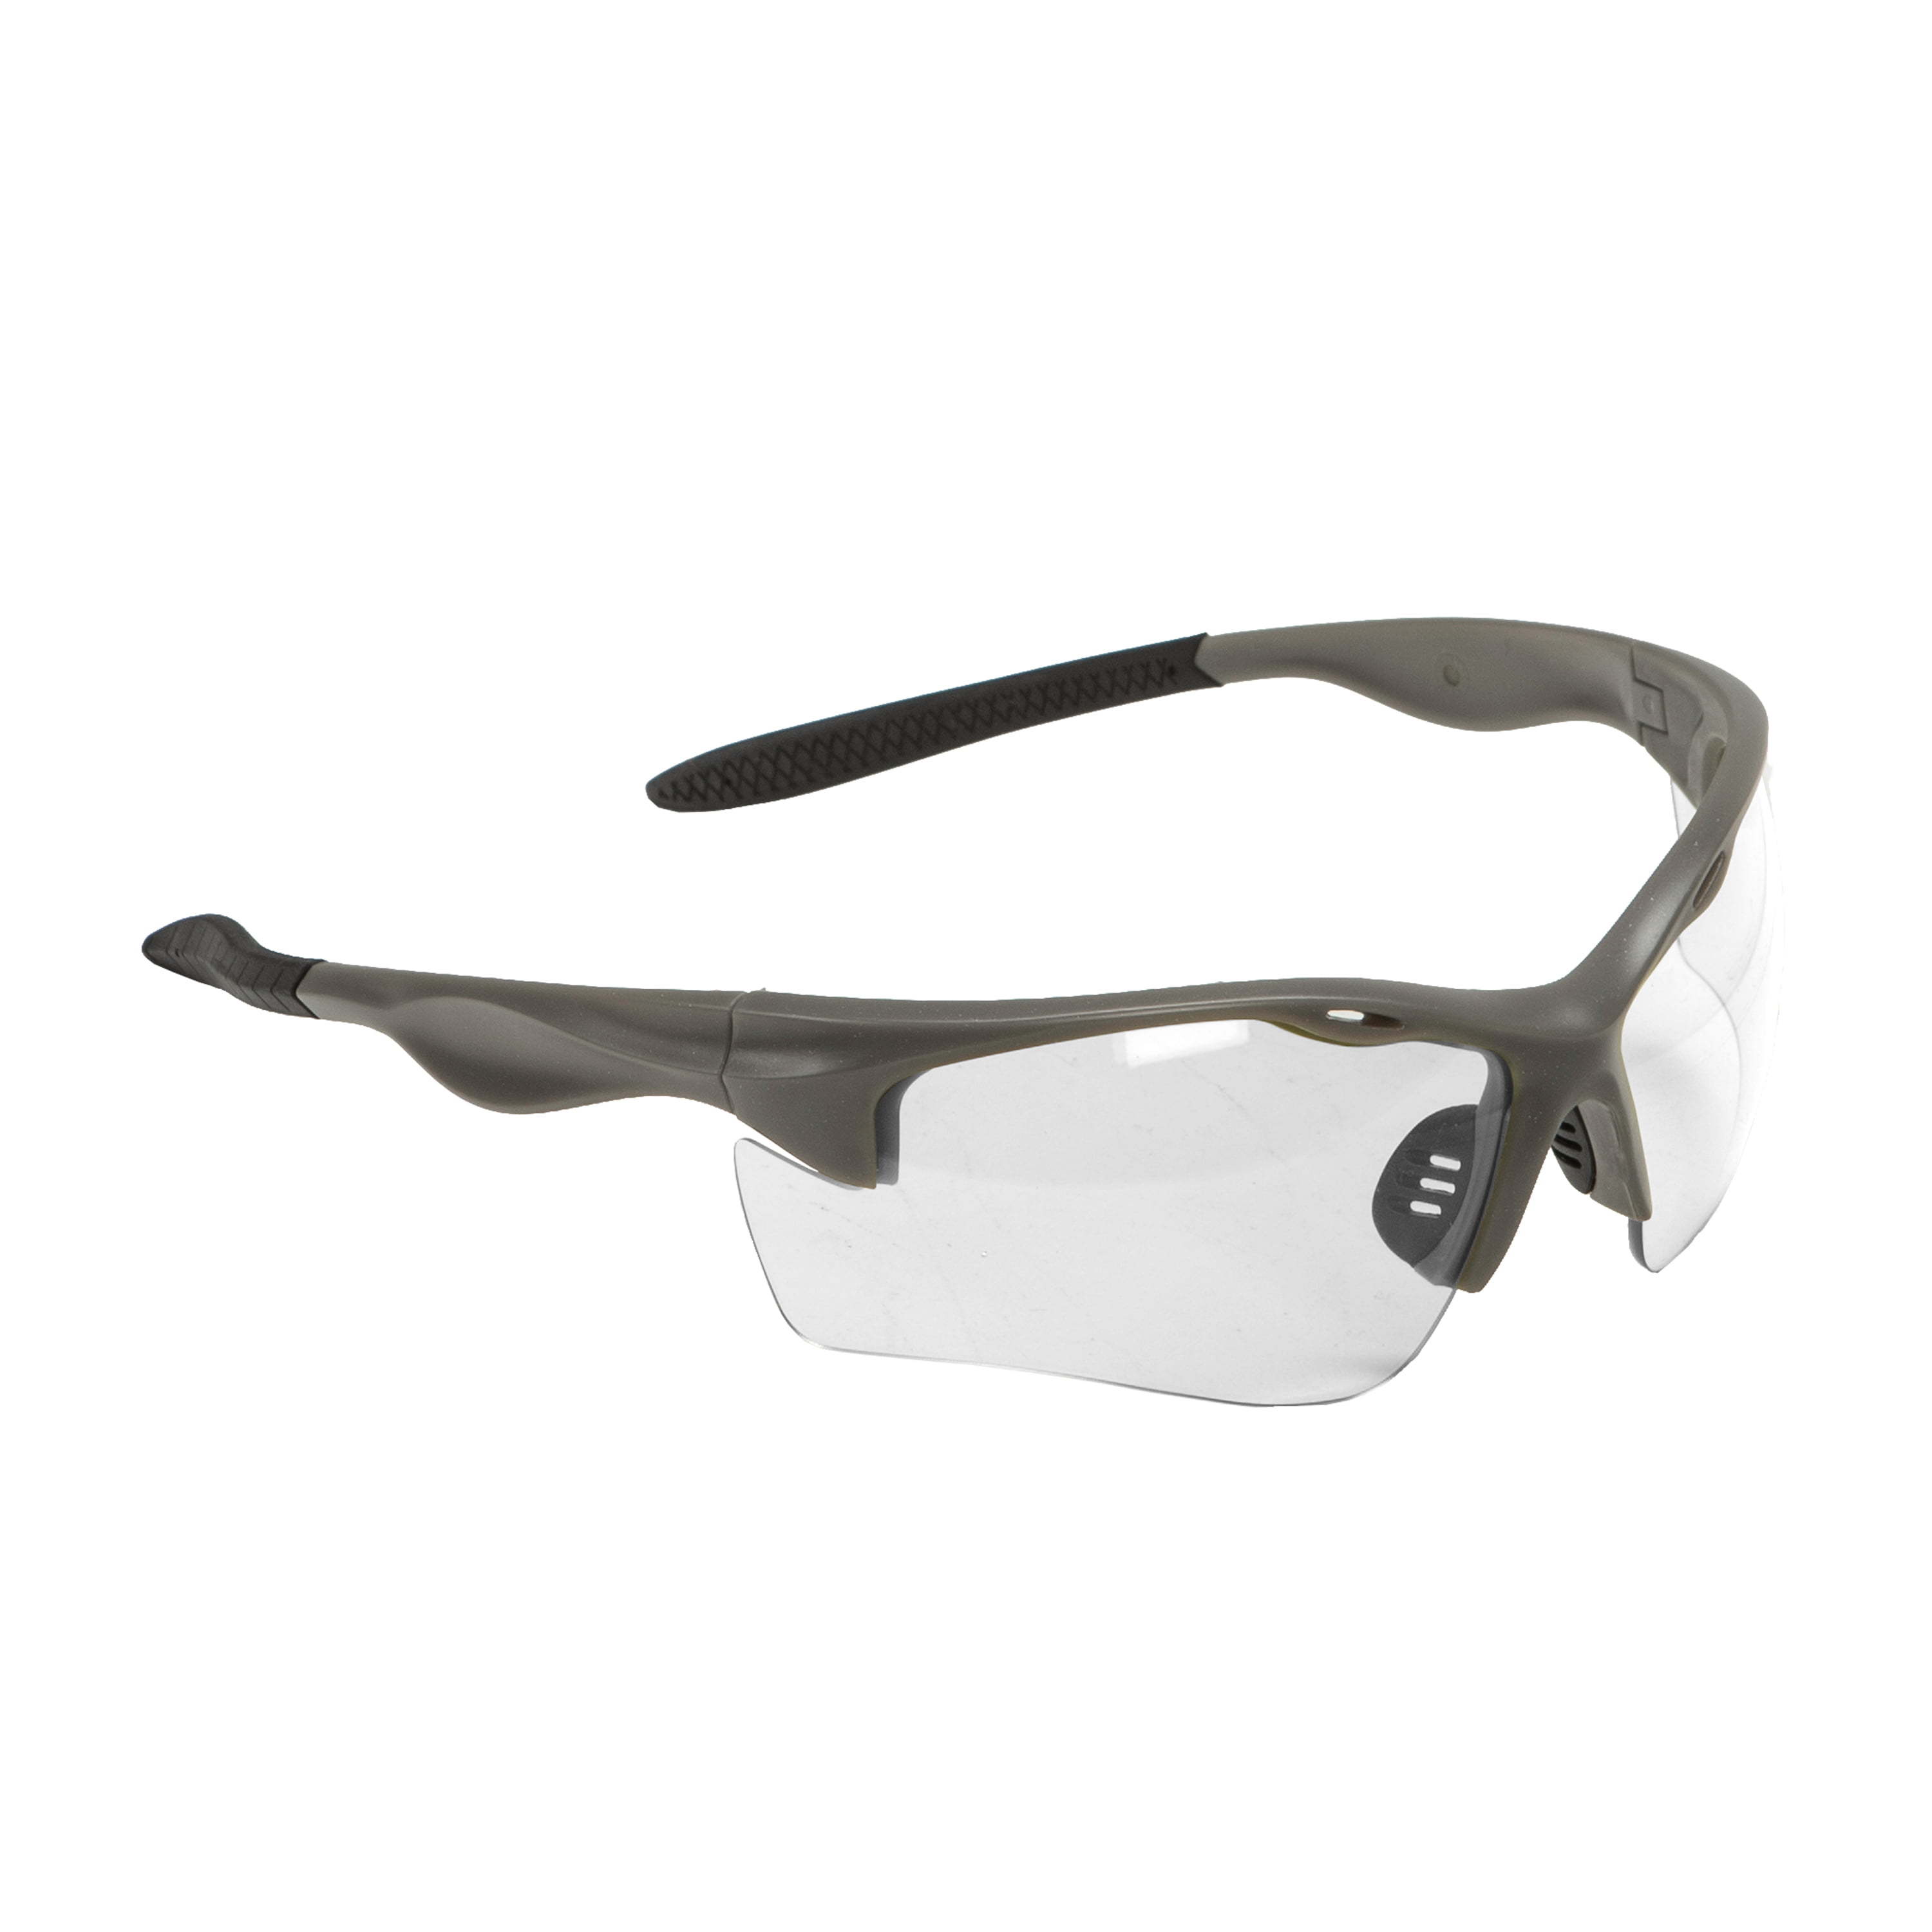 Allen Company Shooting & Safety Glasses, Clear Lenses, Wrap Around Frame,  ANSI Z87 Impact Resistant - Walmart.com